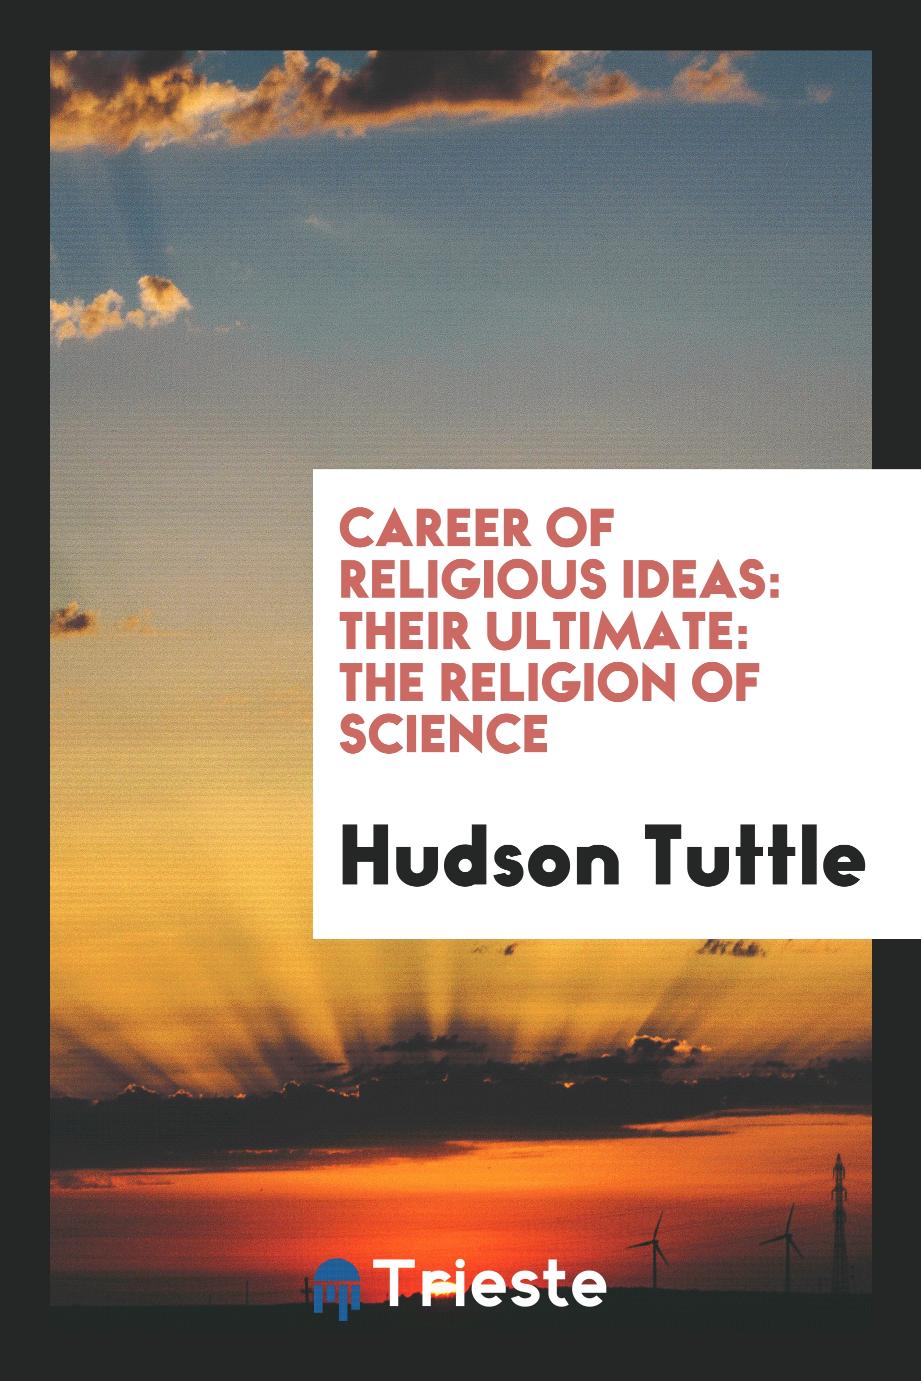 Career of Religious Ideas: Their Ultimate: the Religion of Science